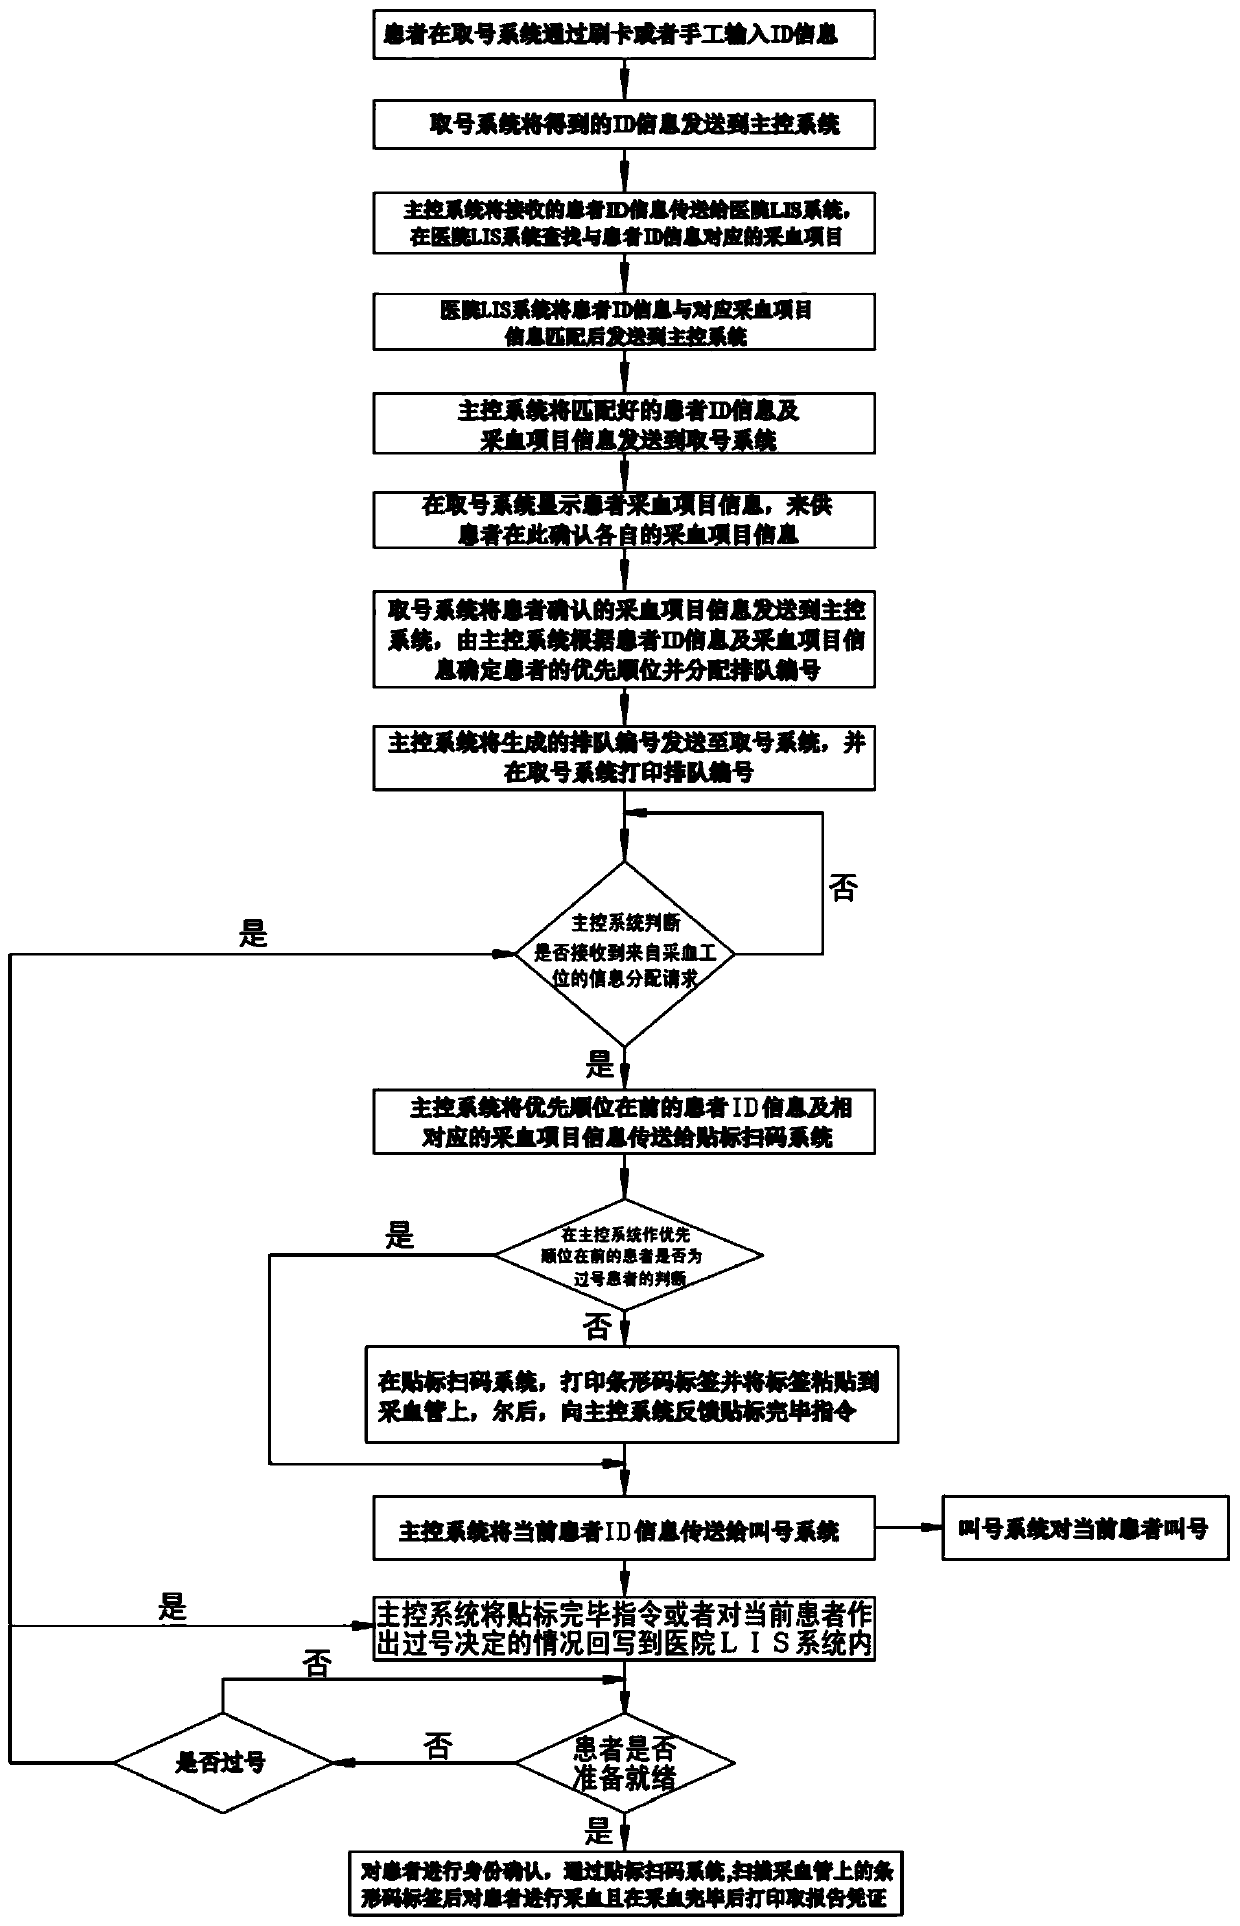 Intelligent automatic blood collection management system and its control method